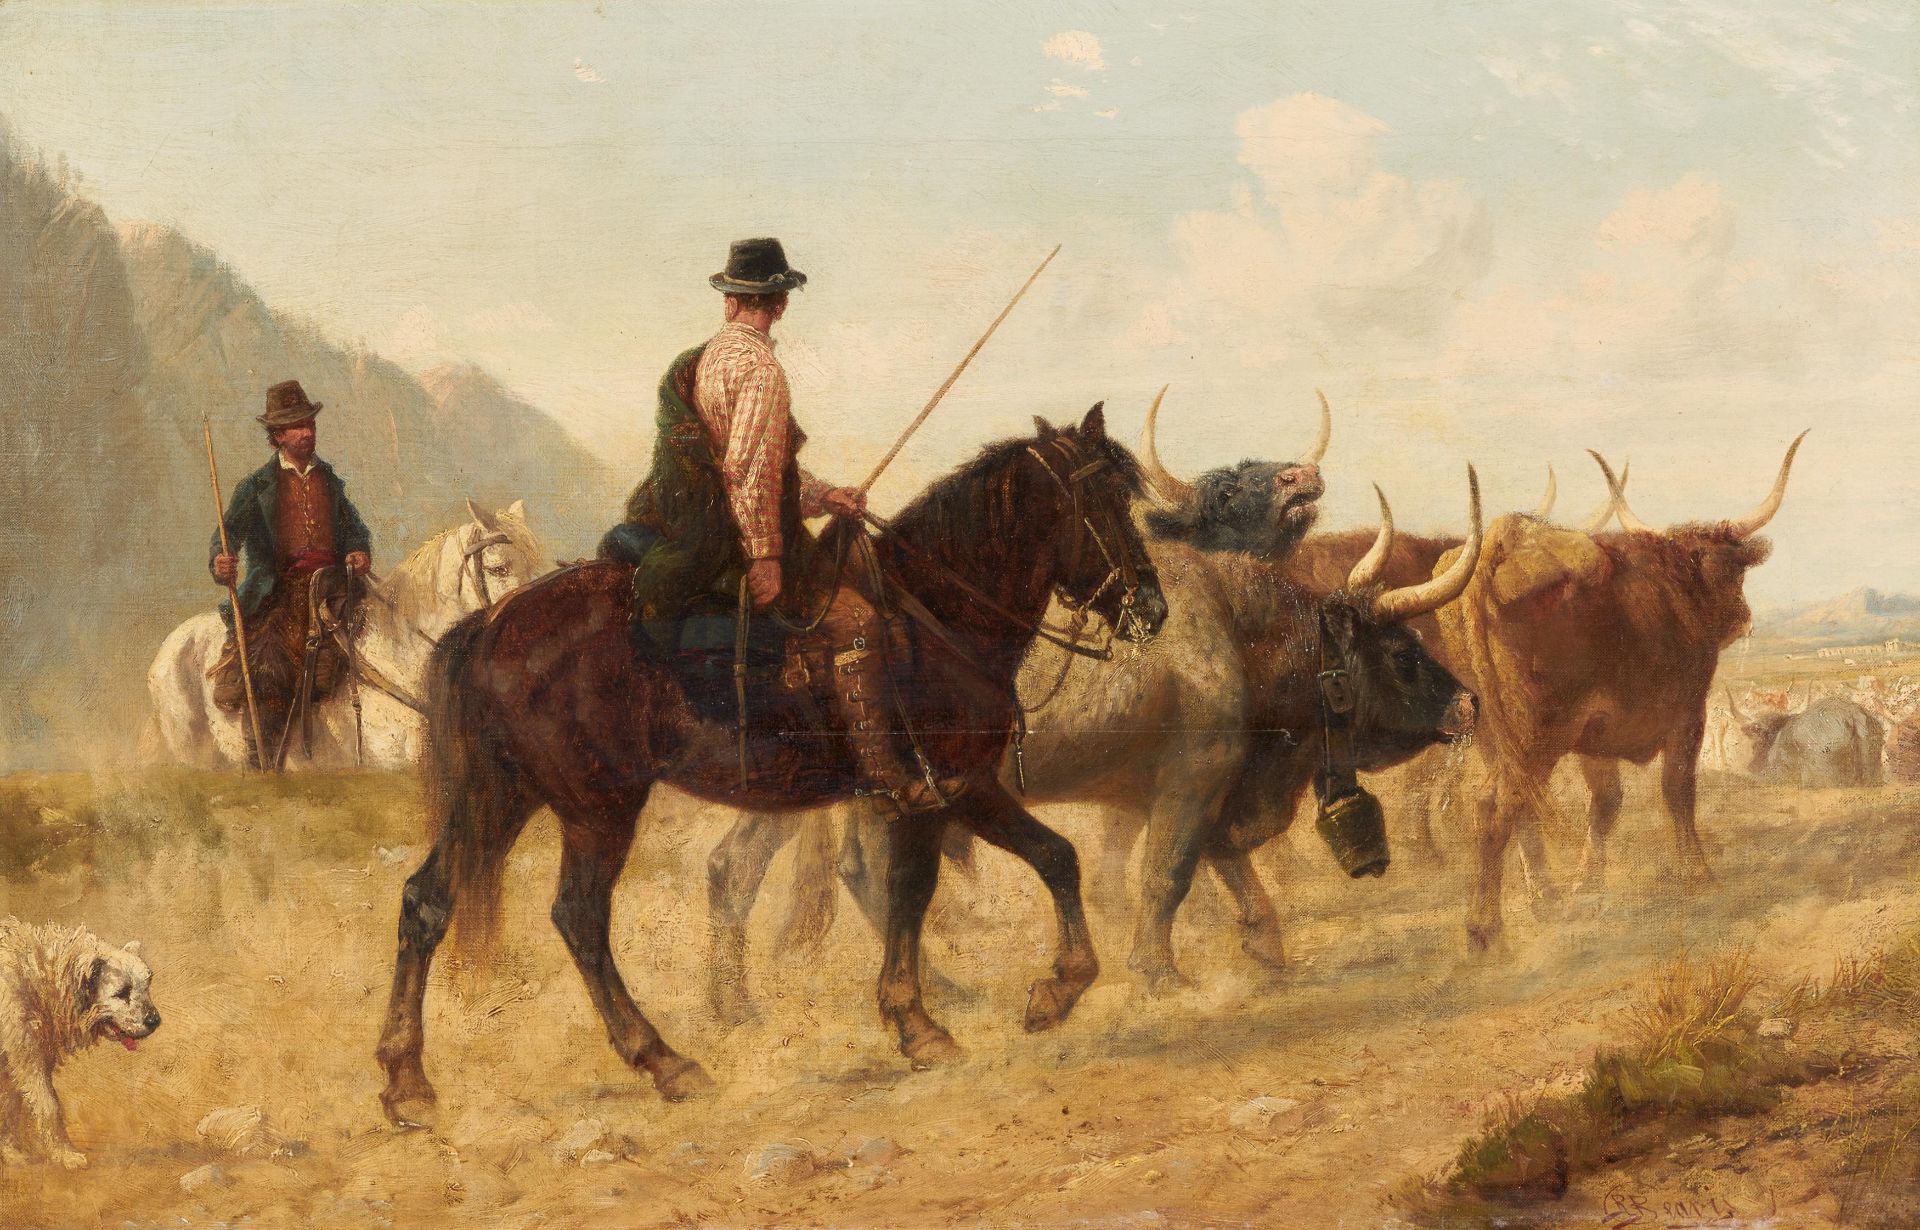 Beavis, Richard 1824 Exmouth - 1896 London   Cattle drive with bulls in Catalonia. Signed on the